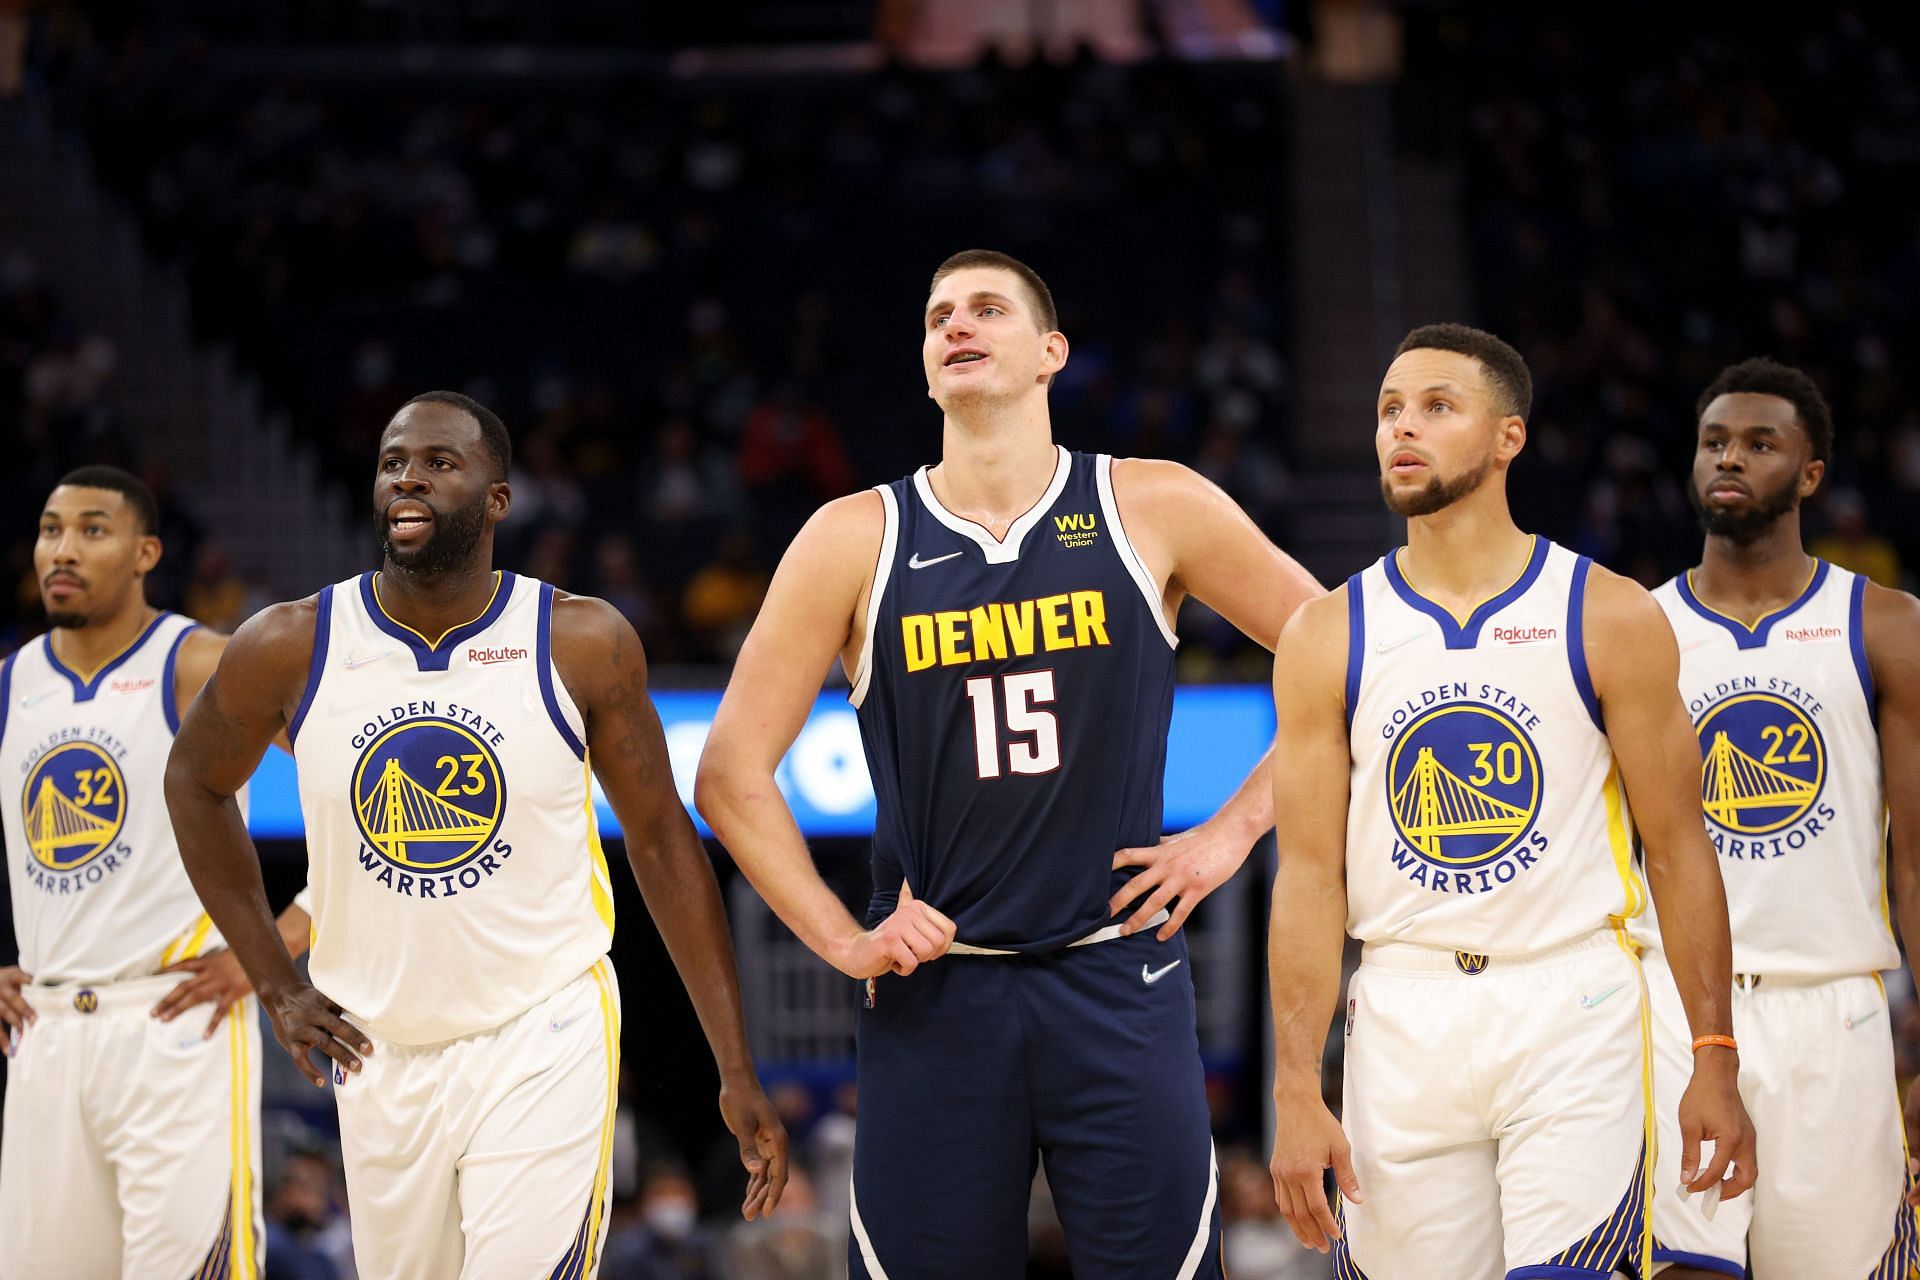 Nikola Jokic of the Denver Nuggets stands in between Otto Porter Jr., Draymond Green, Stephen Curry, and Andrew Wiggins of the Golden State Warriors